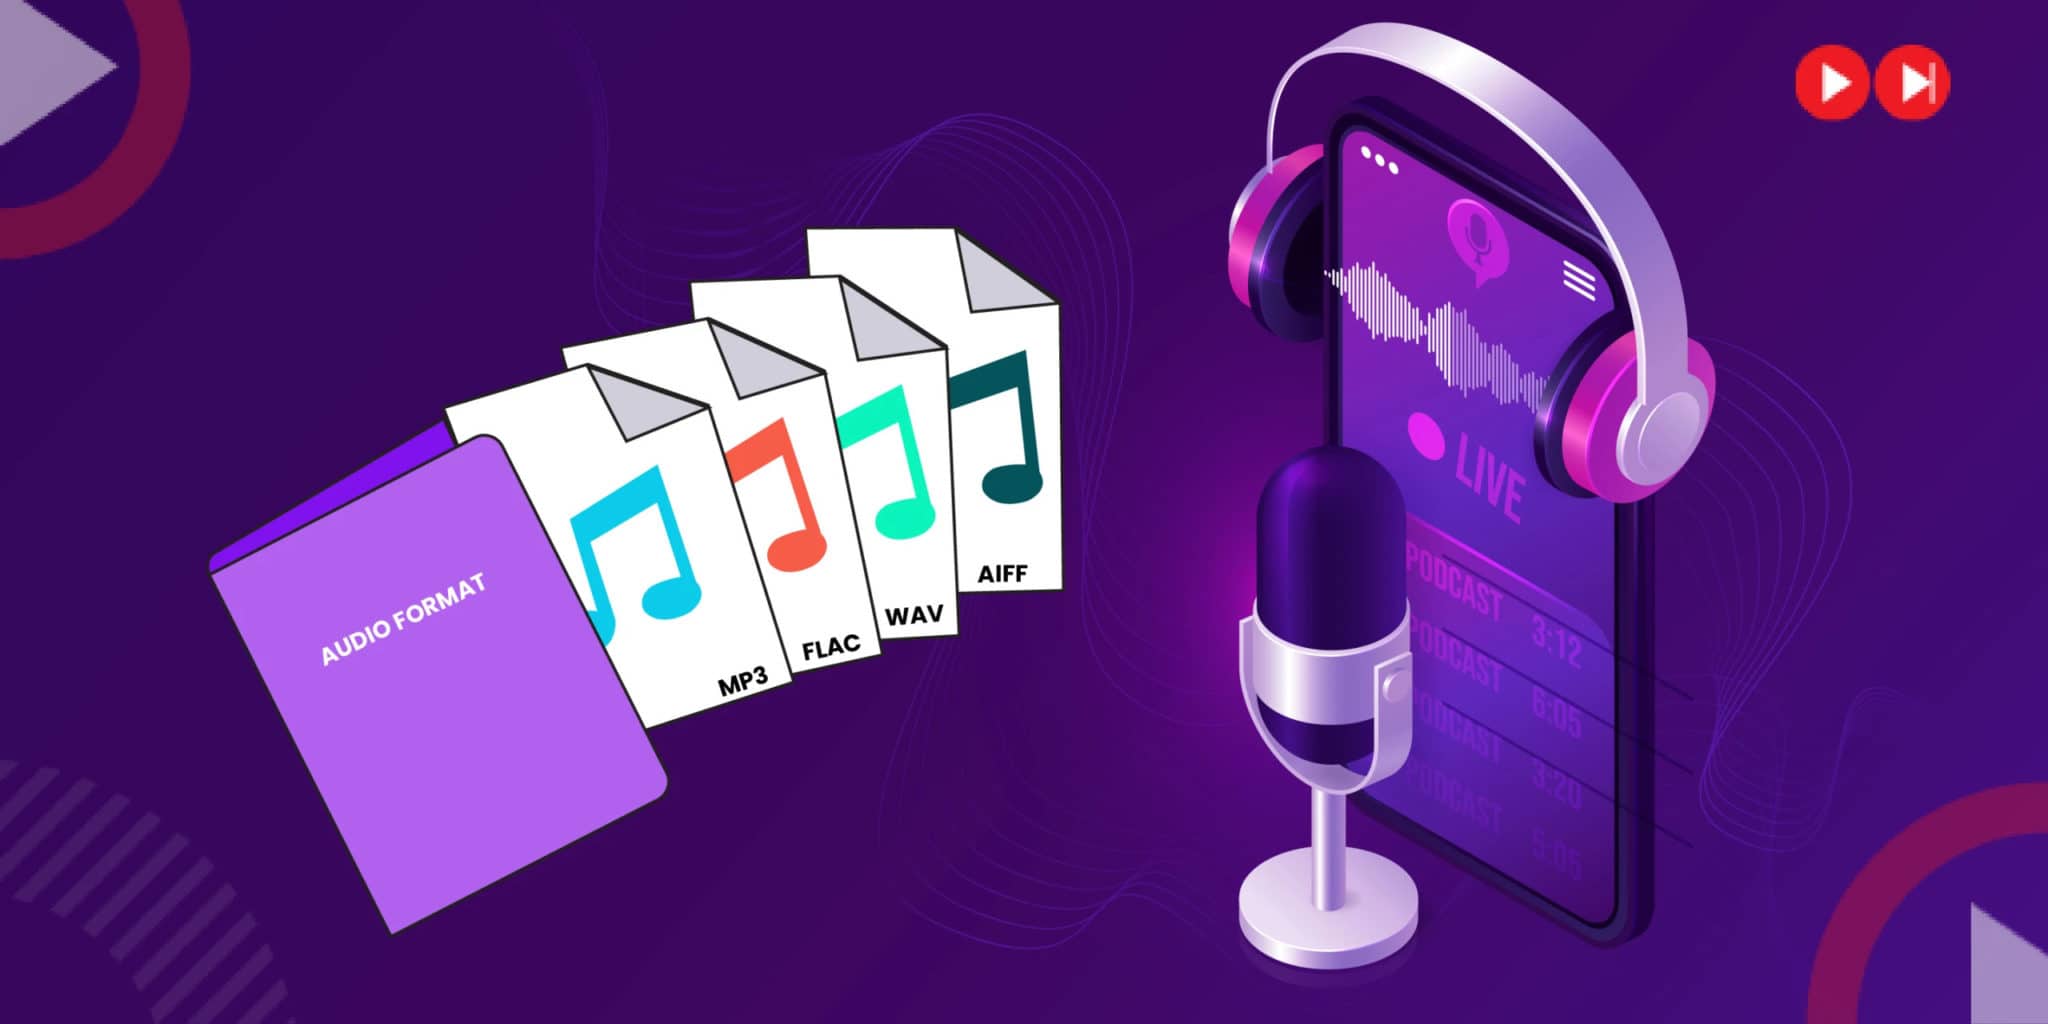 7 Popular audio file types that you should consider